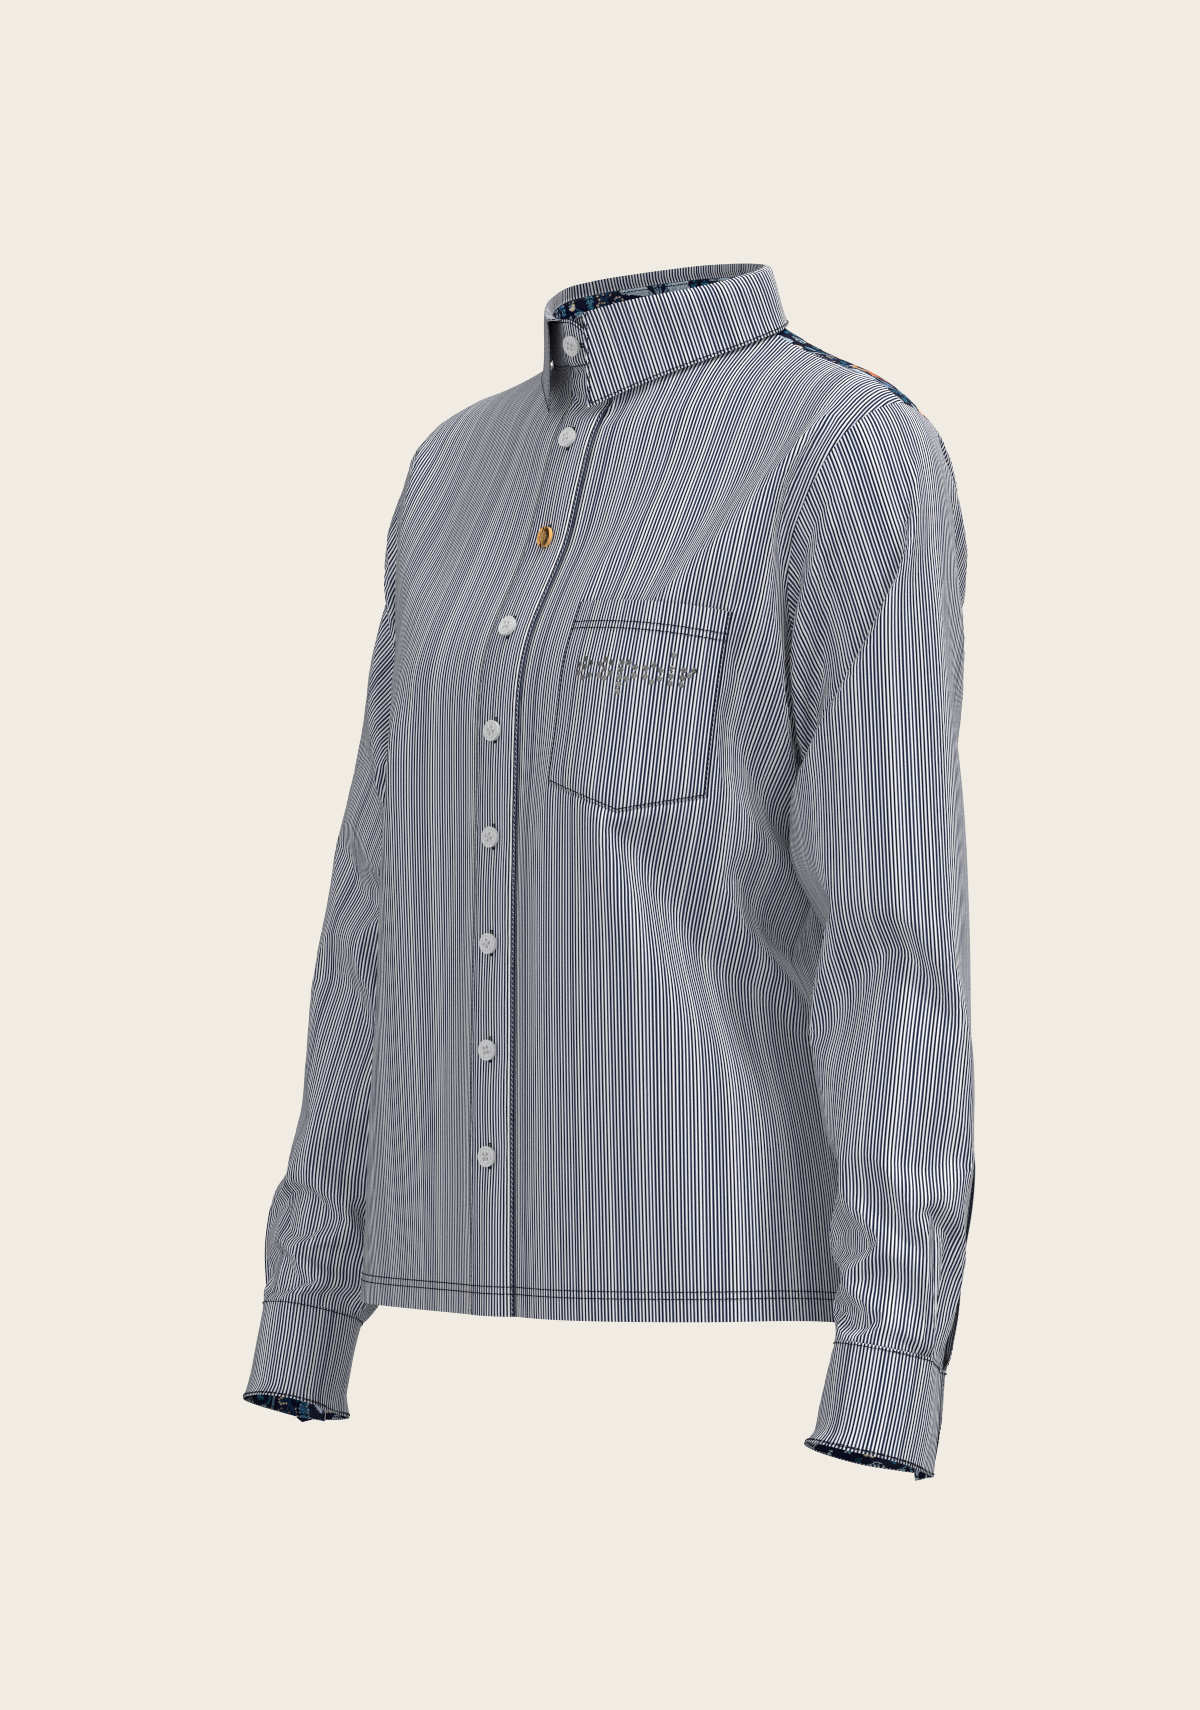  Stripes on Navy Loose Fitting Button Shirt